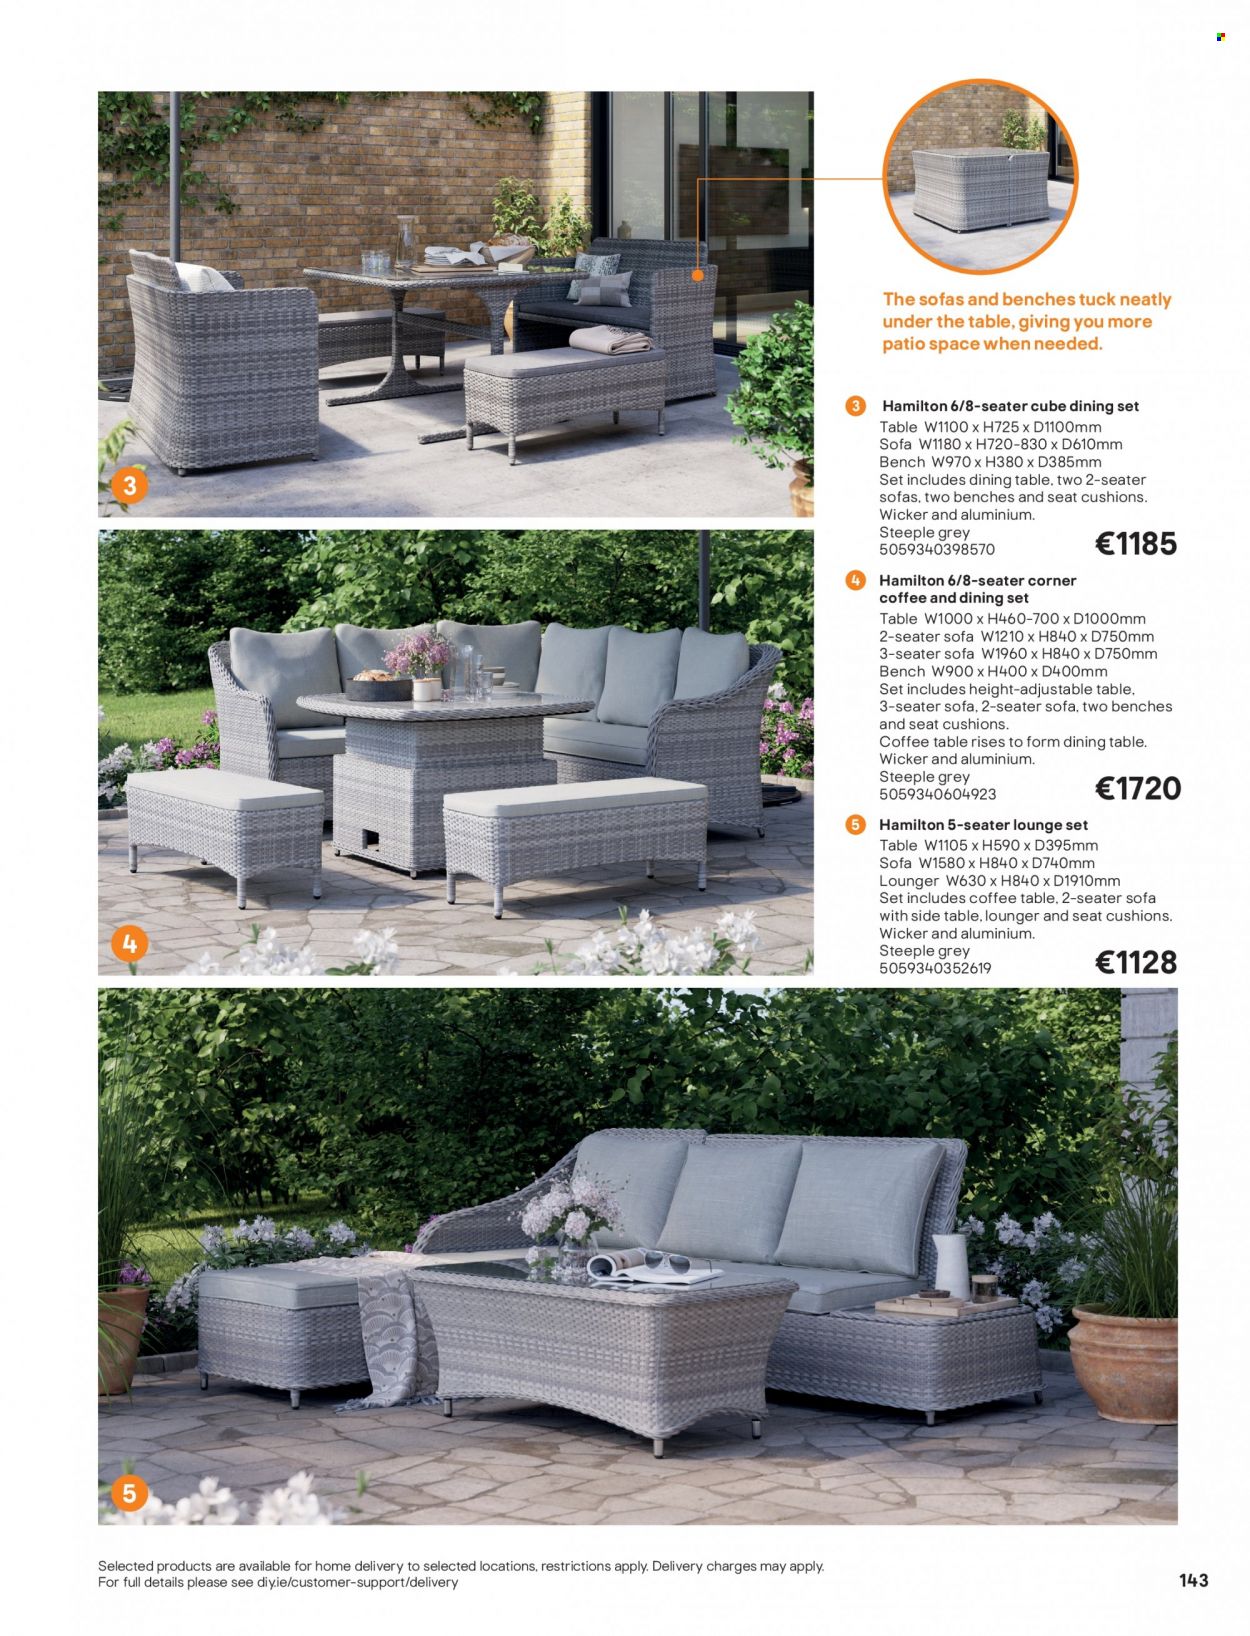 B&Q offer  - Sales products - dining set, dining table, bench, sofa, lounge, coffee table, sidetable, cushion. Page 143.